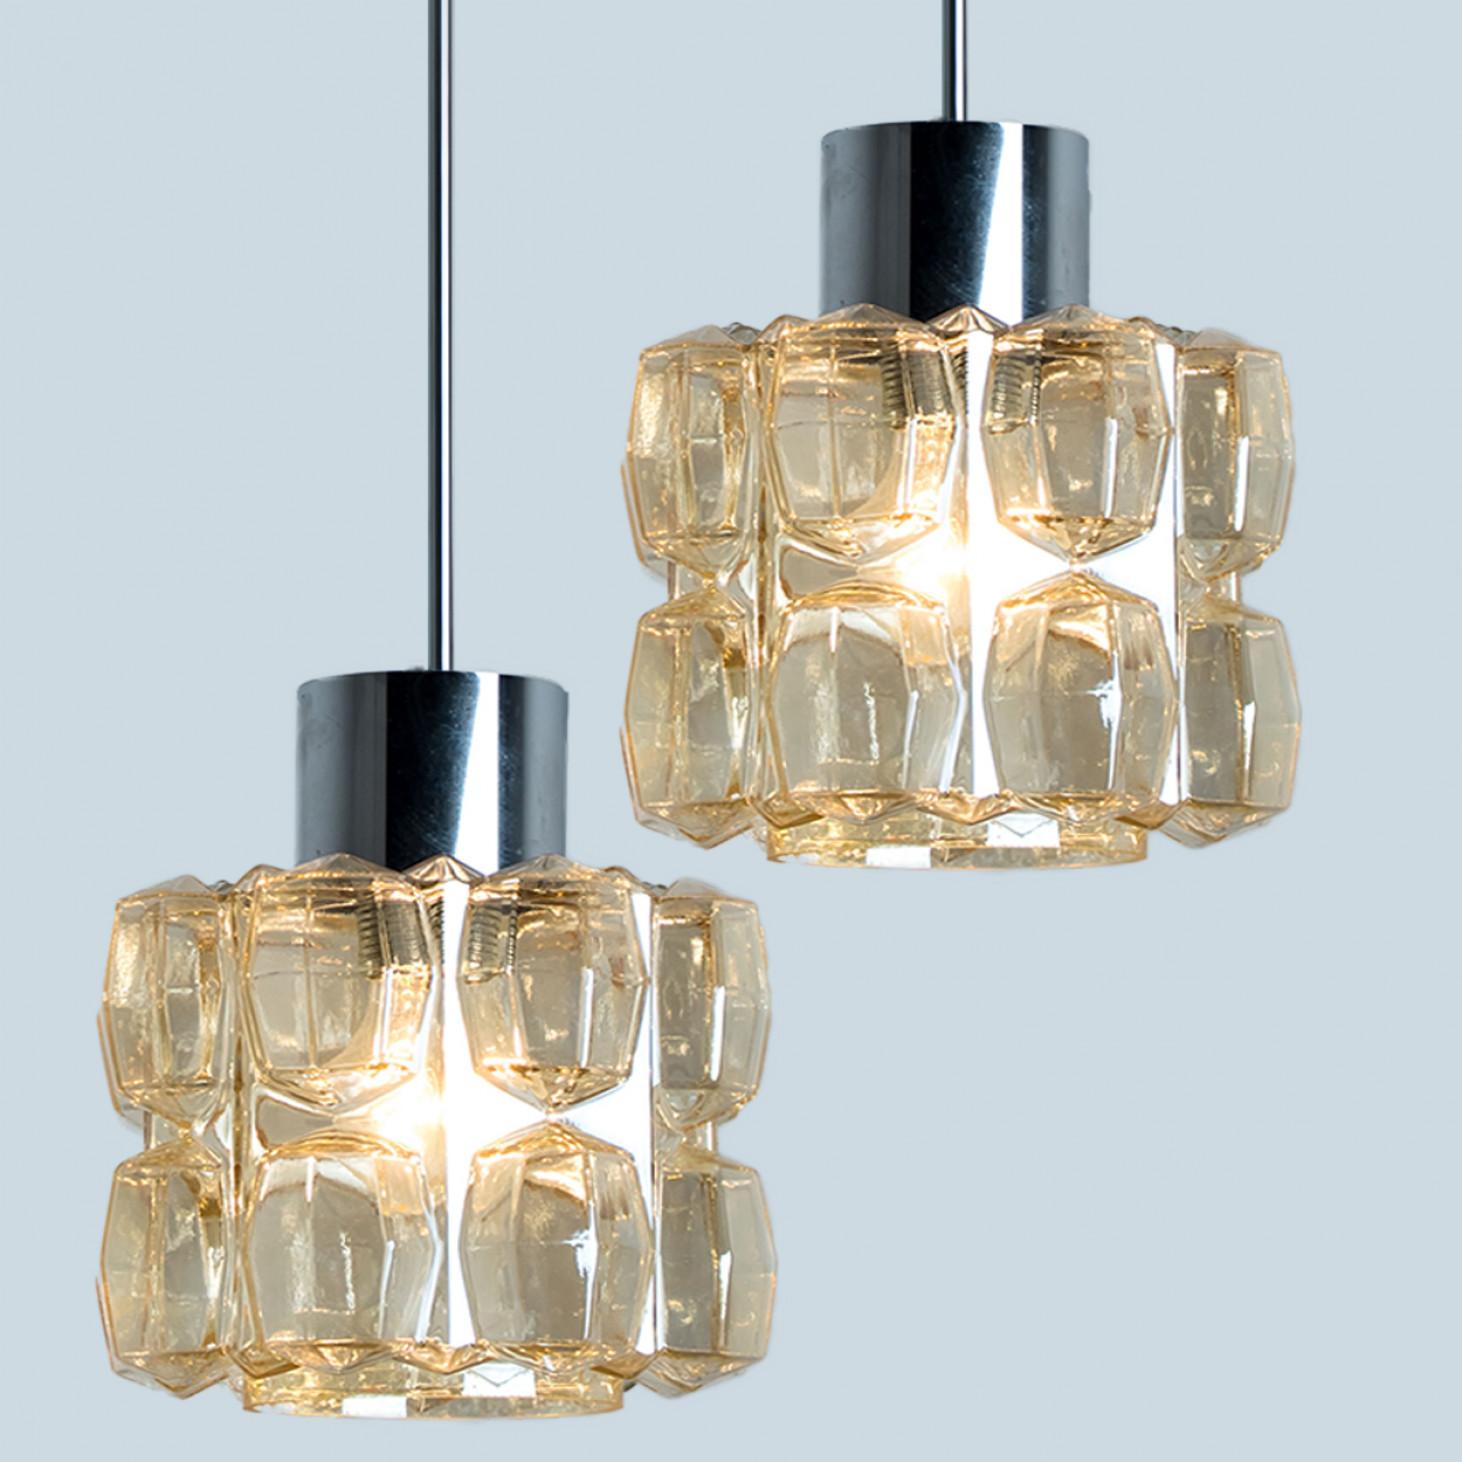 Pair of beautiful bubble glass and chrome chandelier or pendant light designed by Helena Tynell for Glashütte Limburg. A design Classic, the amber colored/toned hand blown glass gives a wonderful warm glow.

Helena Tynell is a finish glass and